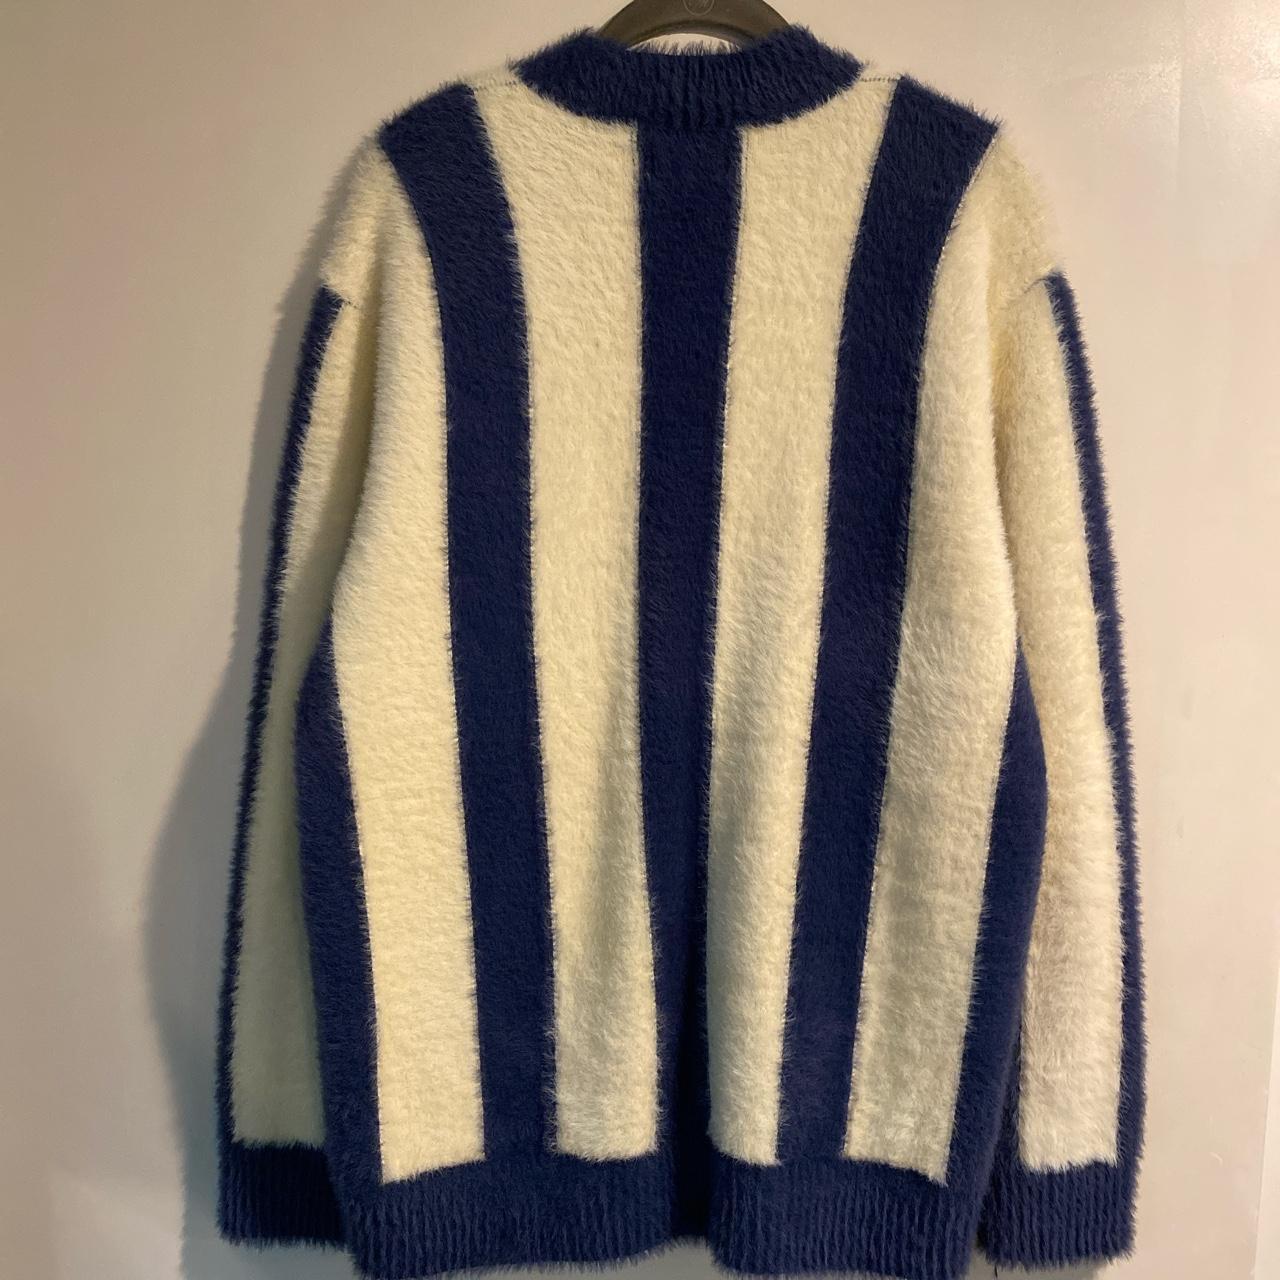 Golf Wang Mohair Cardigan , Perfect Condition , Size M